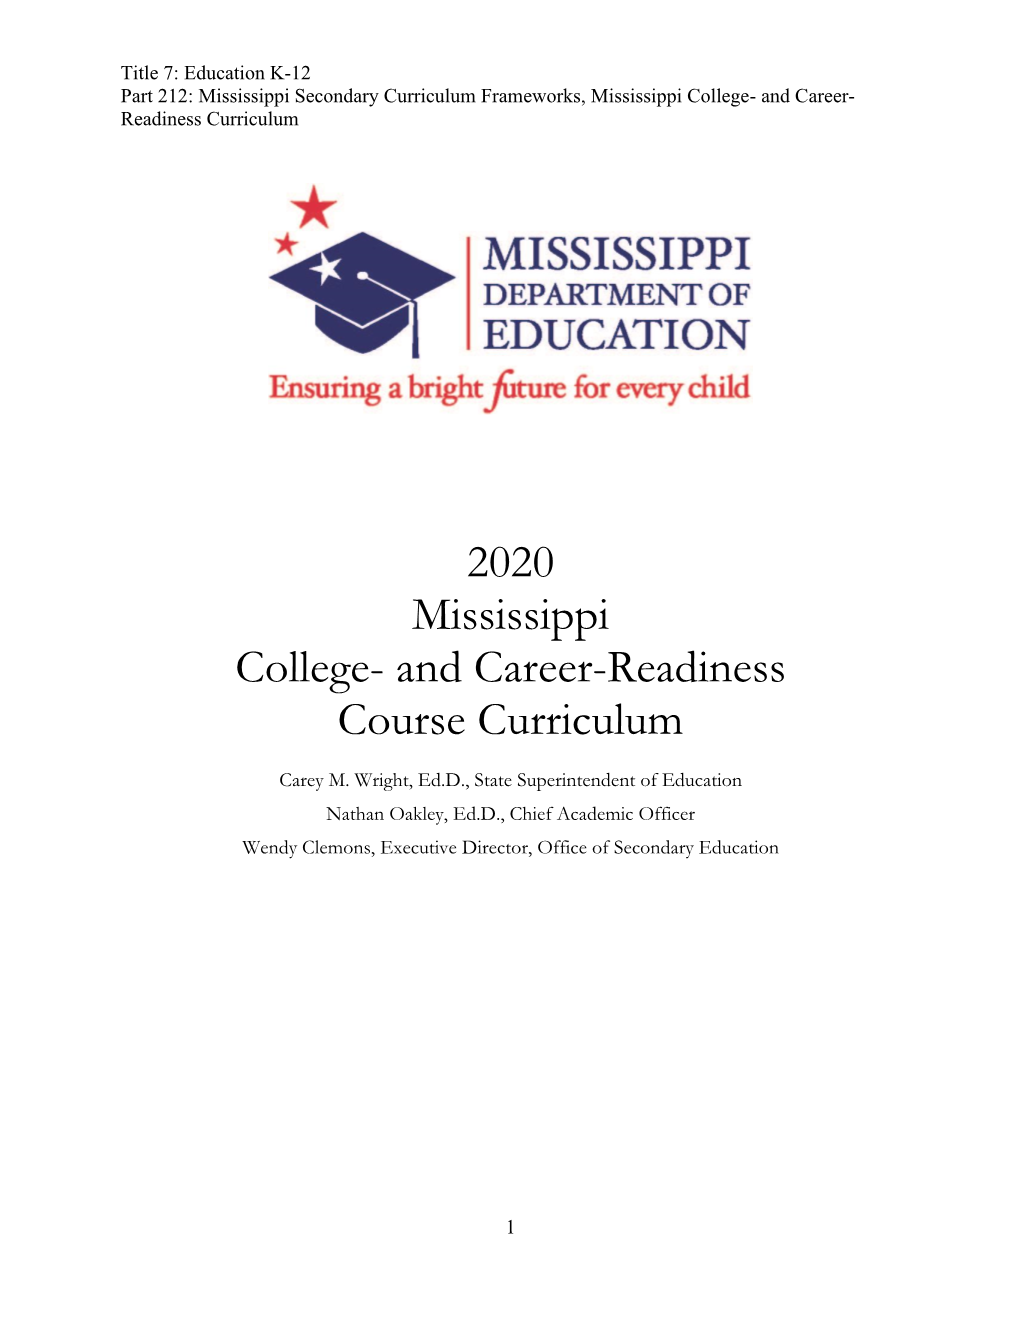 2020 Mississippi College- and Career-Readiness Course Curriculum